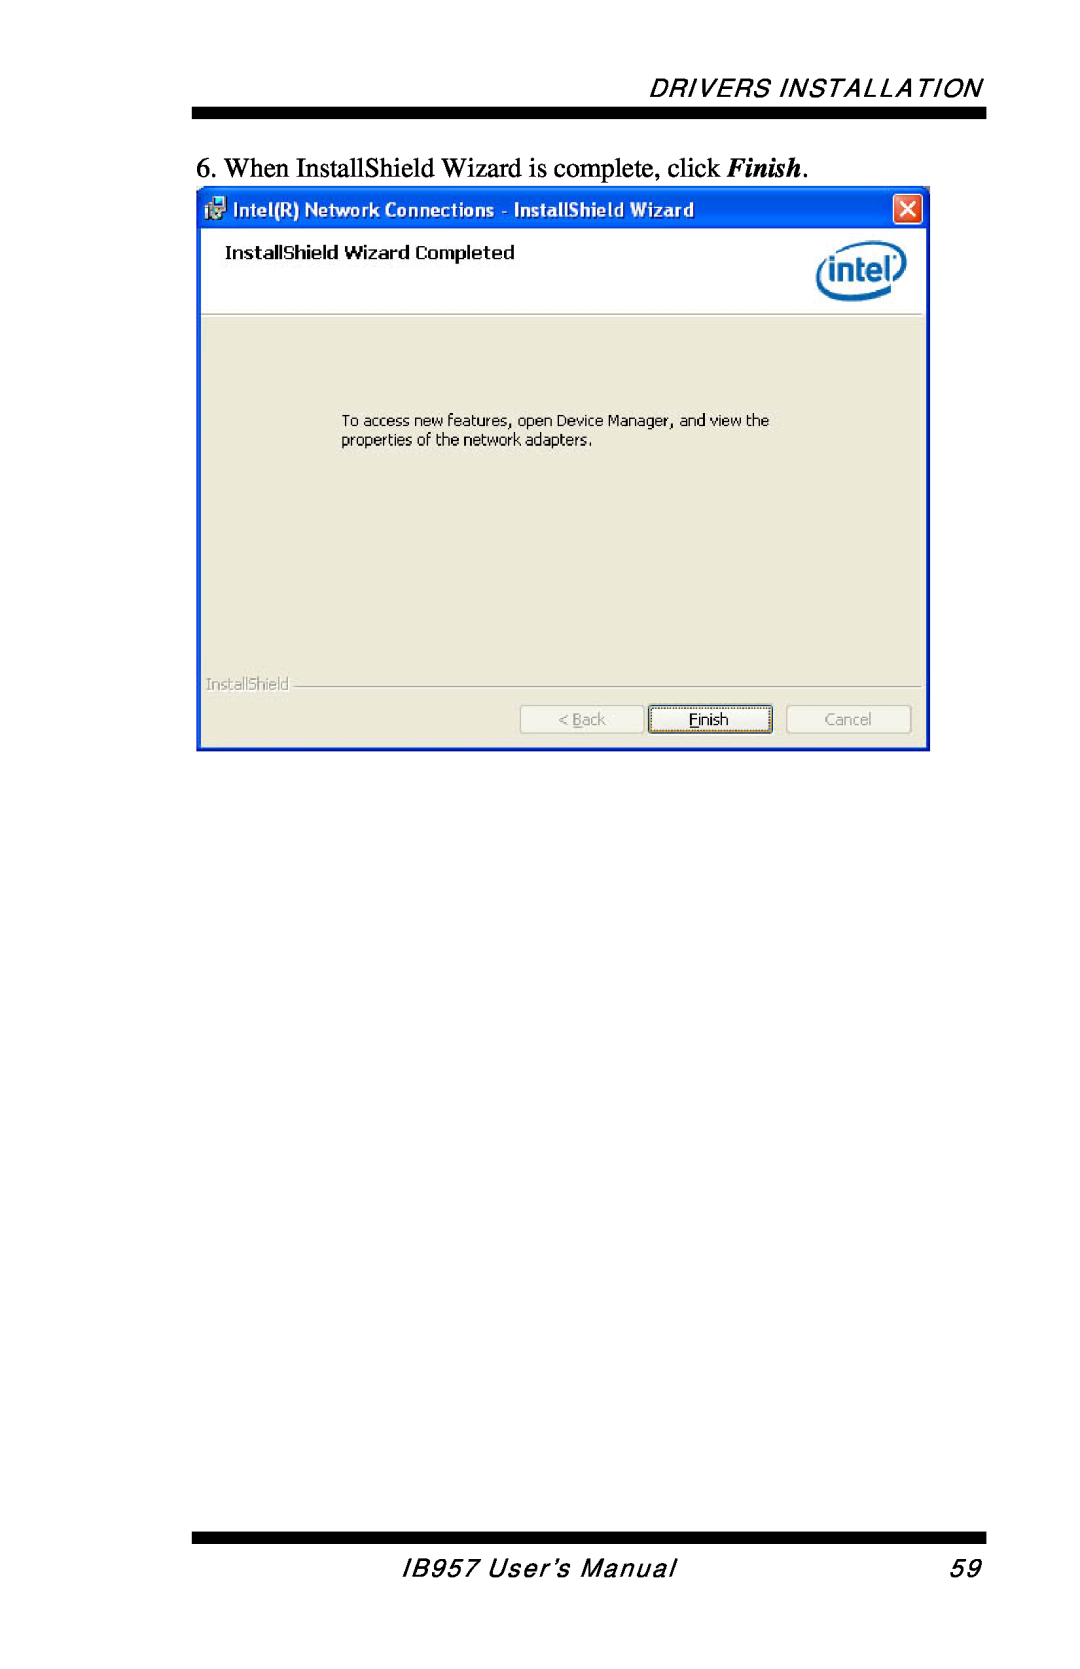 Intel user manual When InstallShield Wizard is complete, click Finish, Drivers Installation, IB957 User’s Manual 